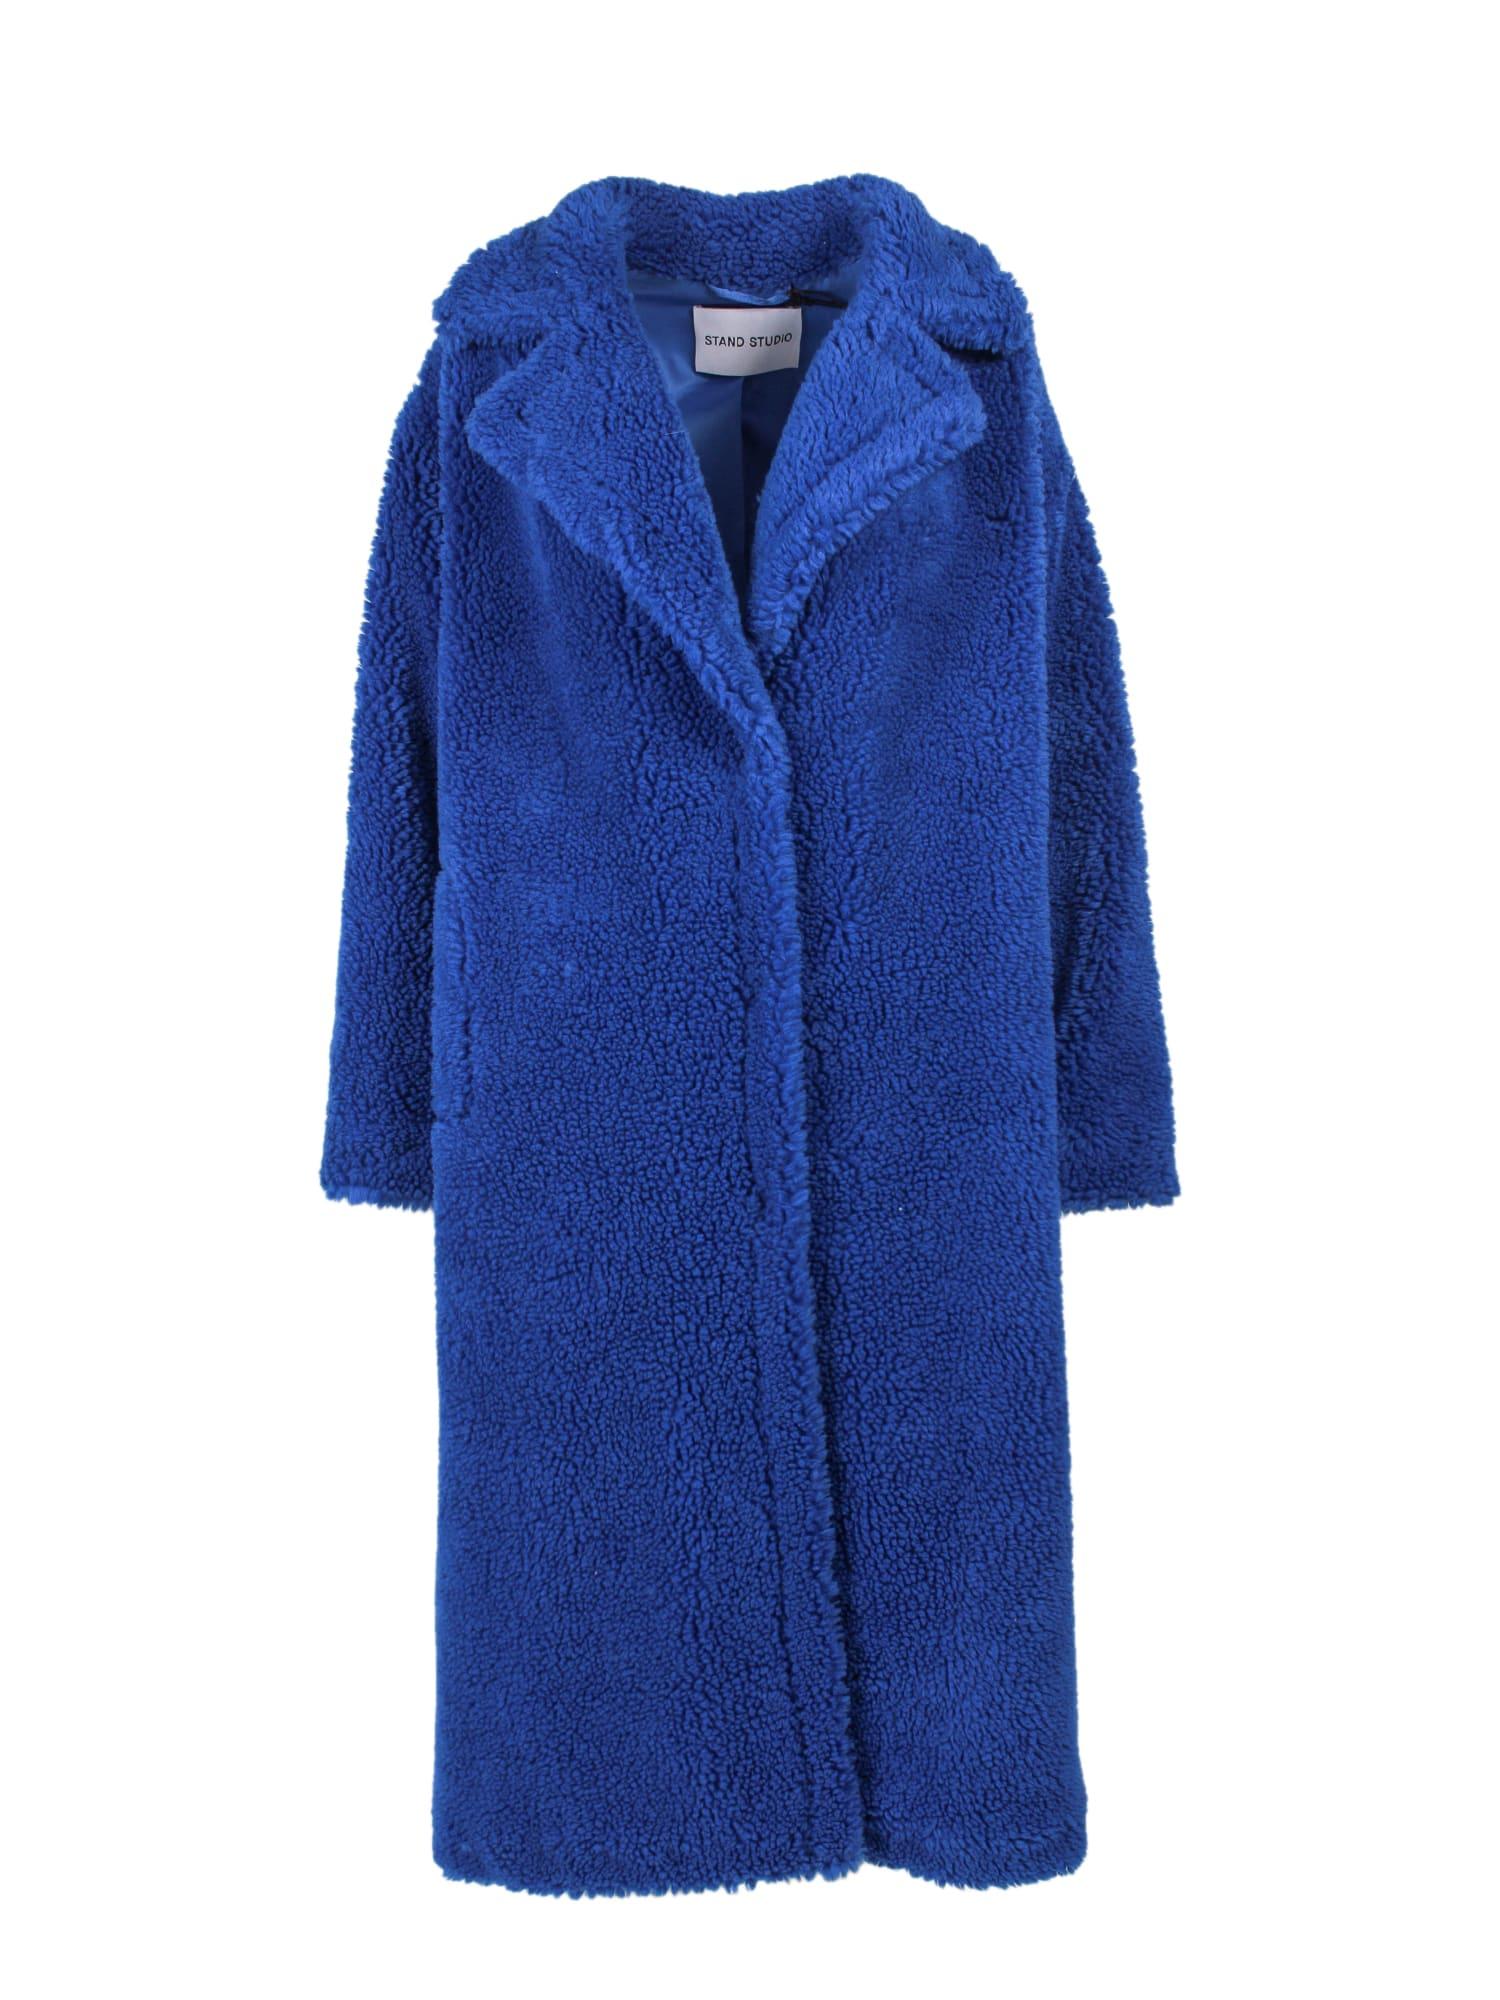 Stand Studio Synthetic Maria Coat in Blue | Lyst